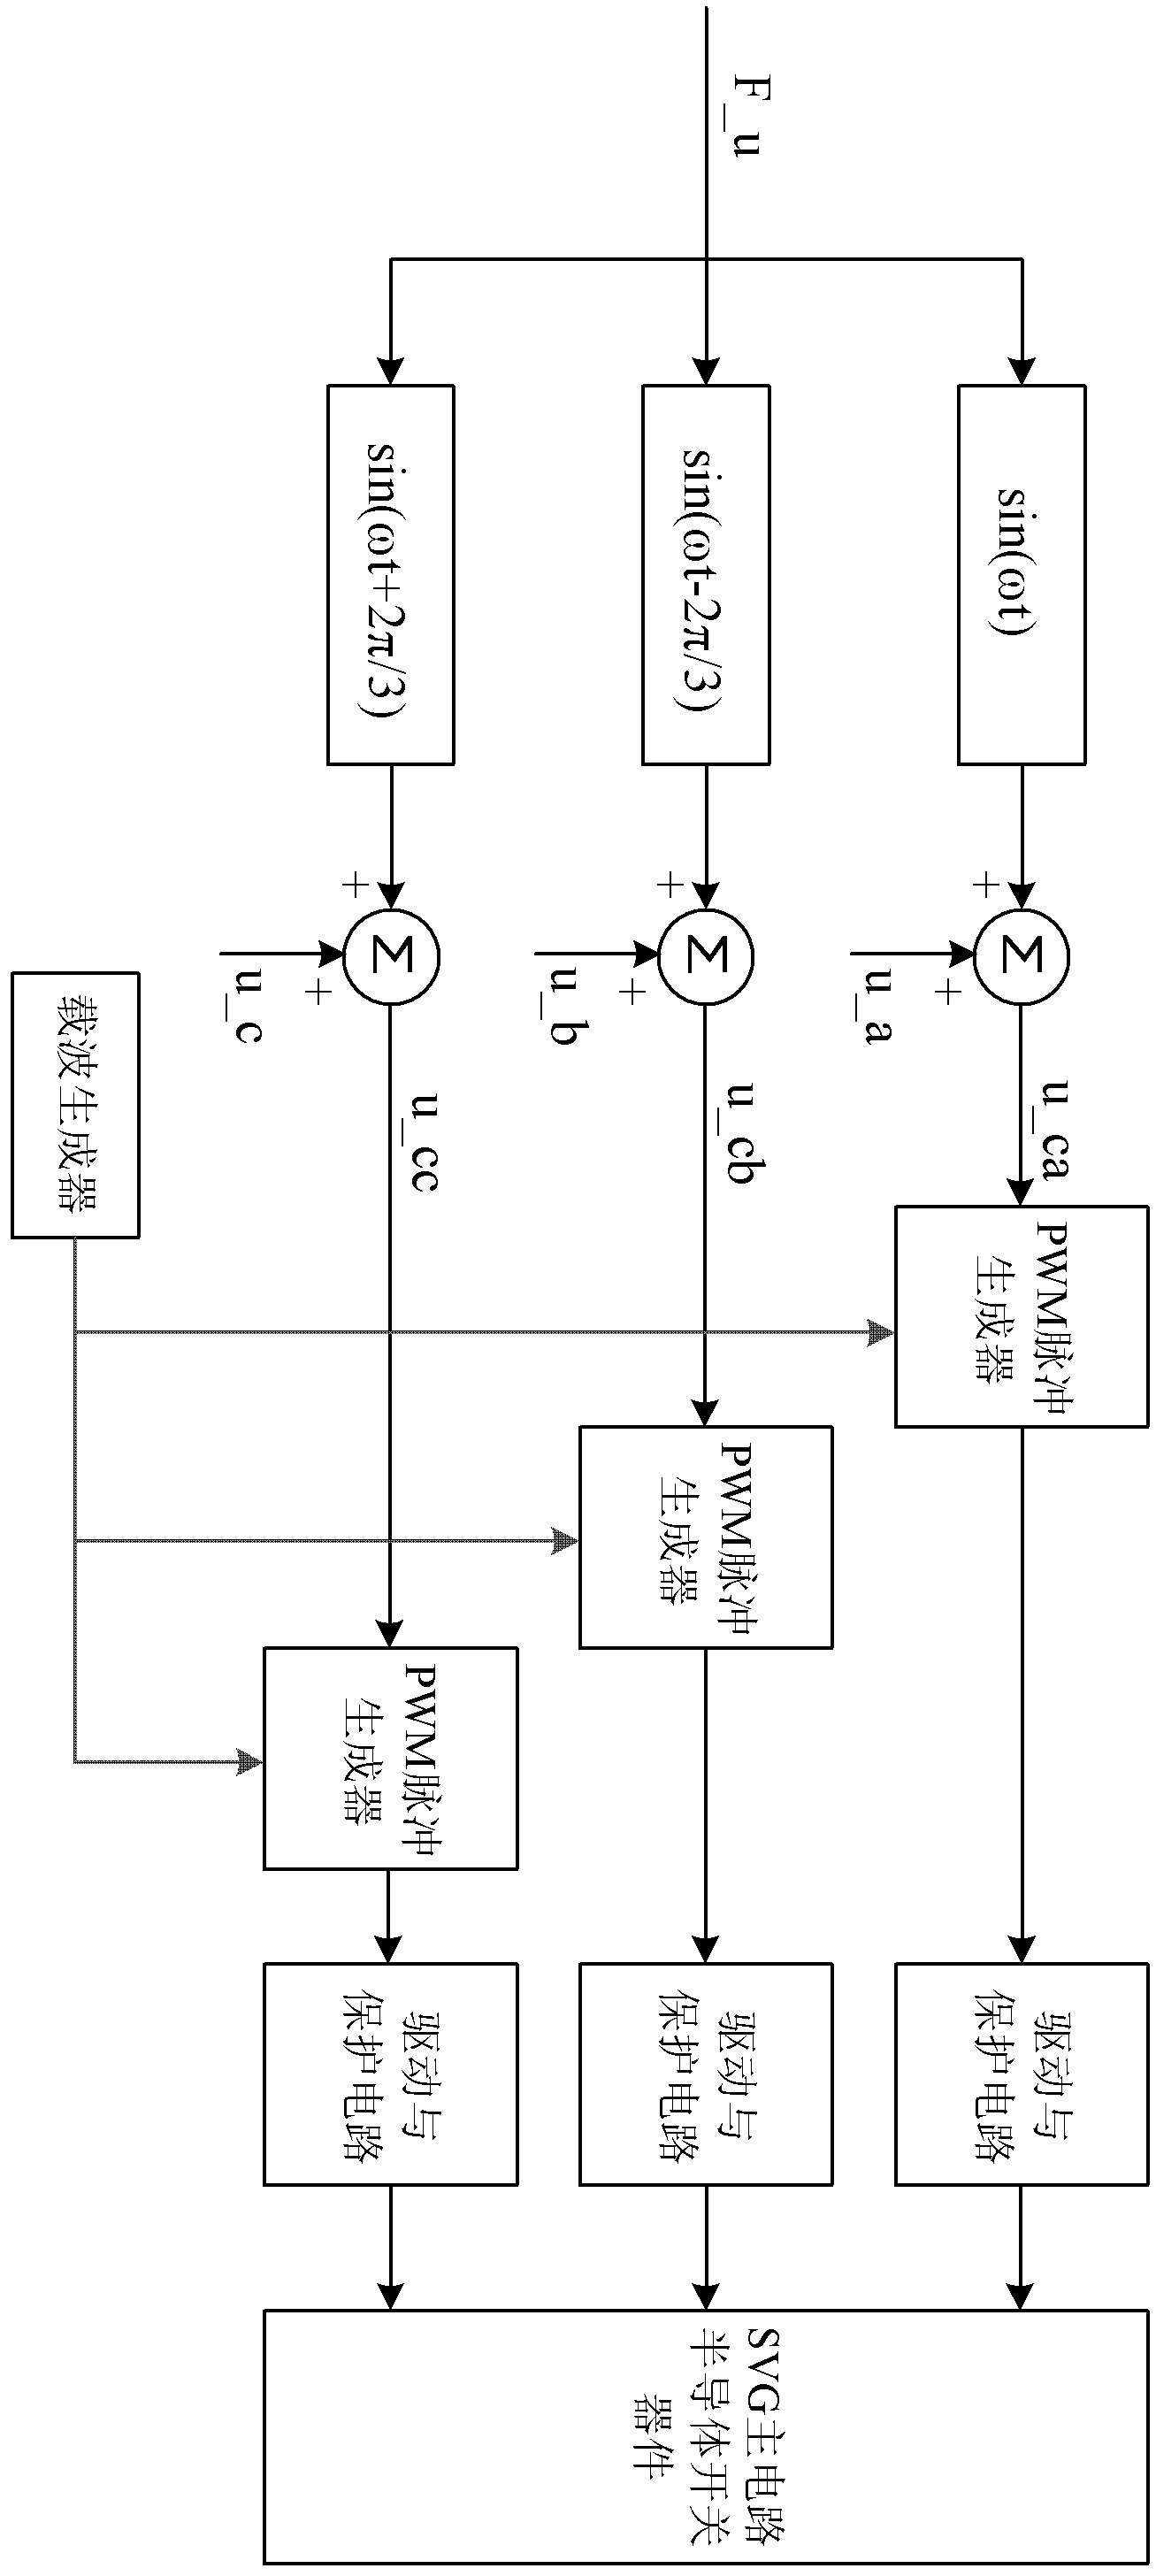 Method for solving three-phase voltage imbalance by using SVG (Static Var Generator)